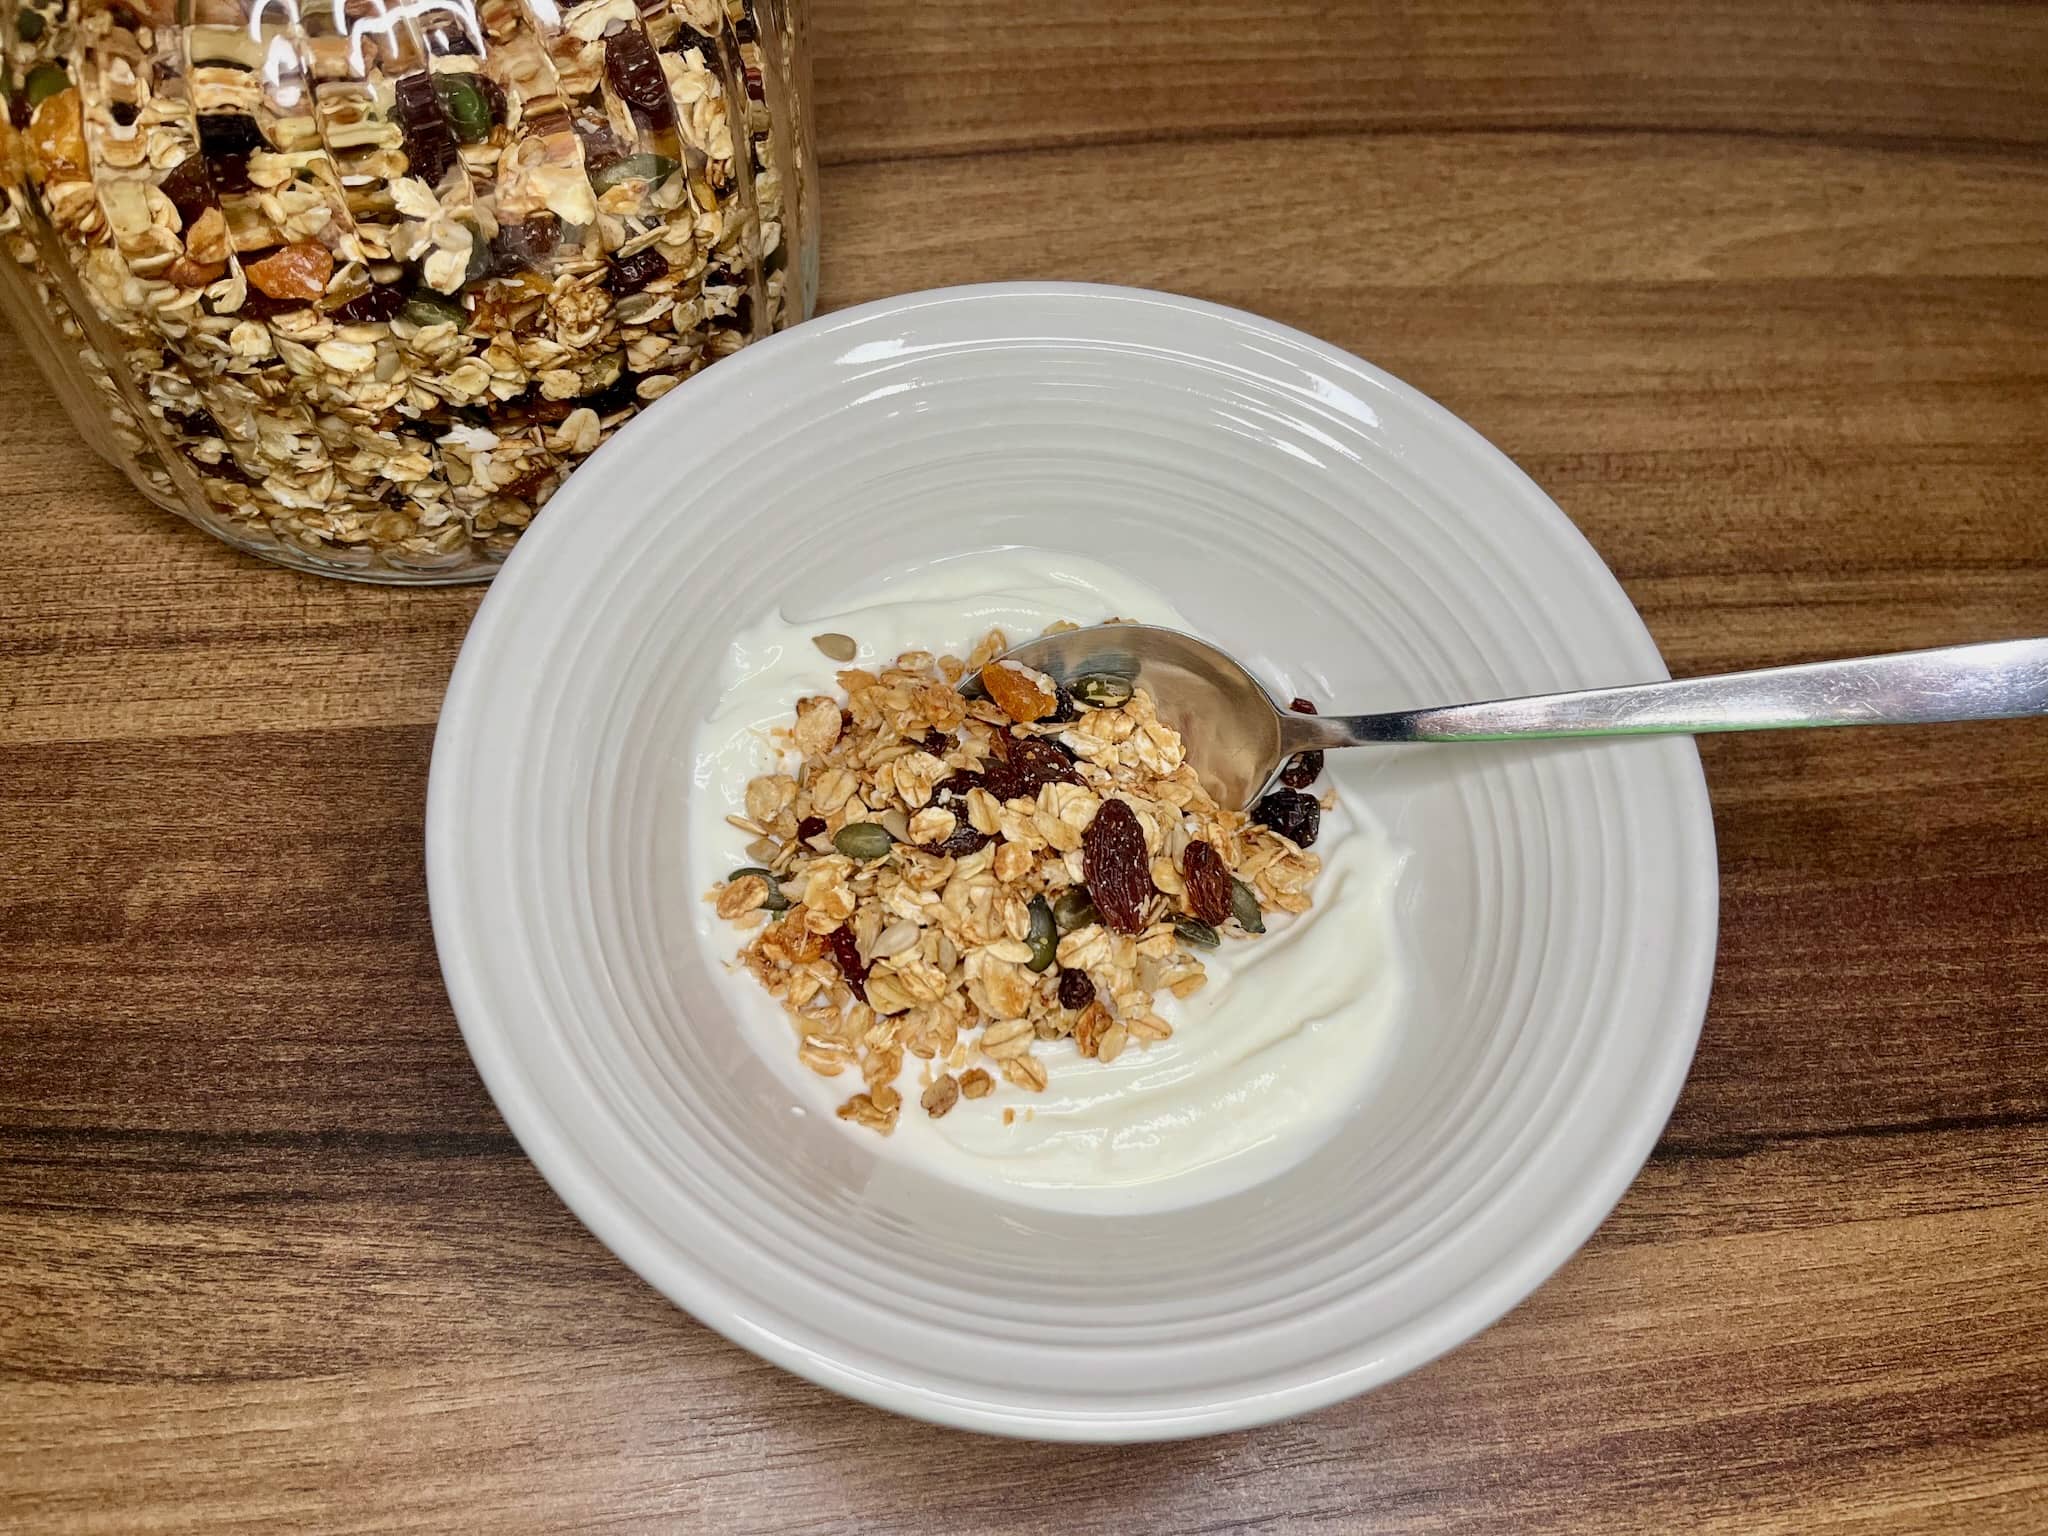 A portion of nut-free homemade granola on a plate with yoghurt